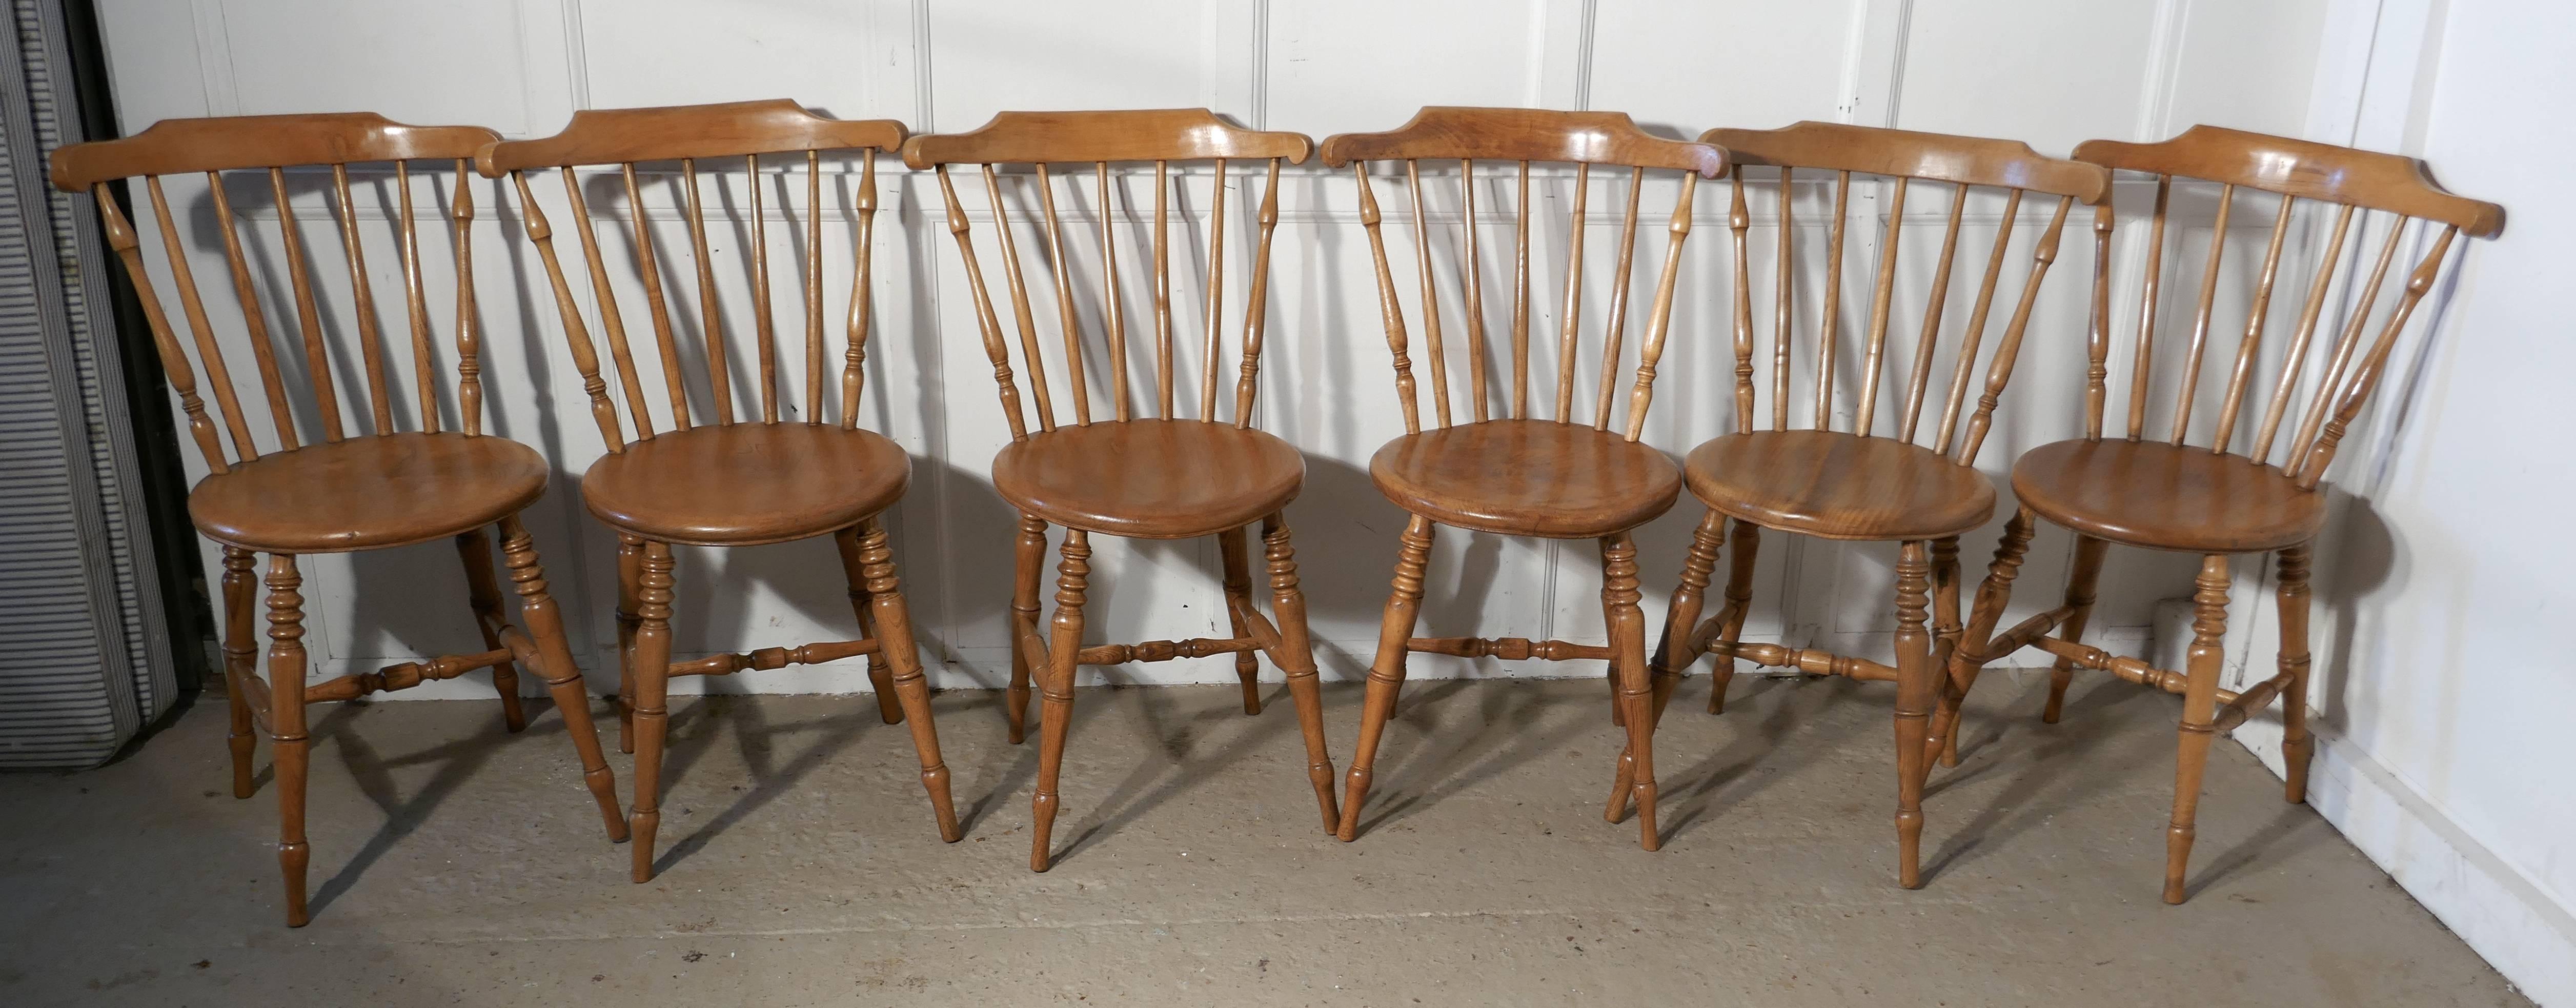 Set of six beech and ash country kitchen dining chairs

The chairs date from the late 19th century, they are a Classic spindle back design, with thick round ash seats, they are very sturdy chairs and very sound, the joints are all good, there is